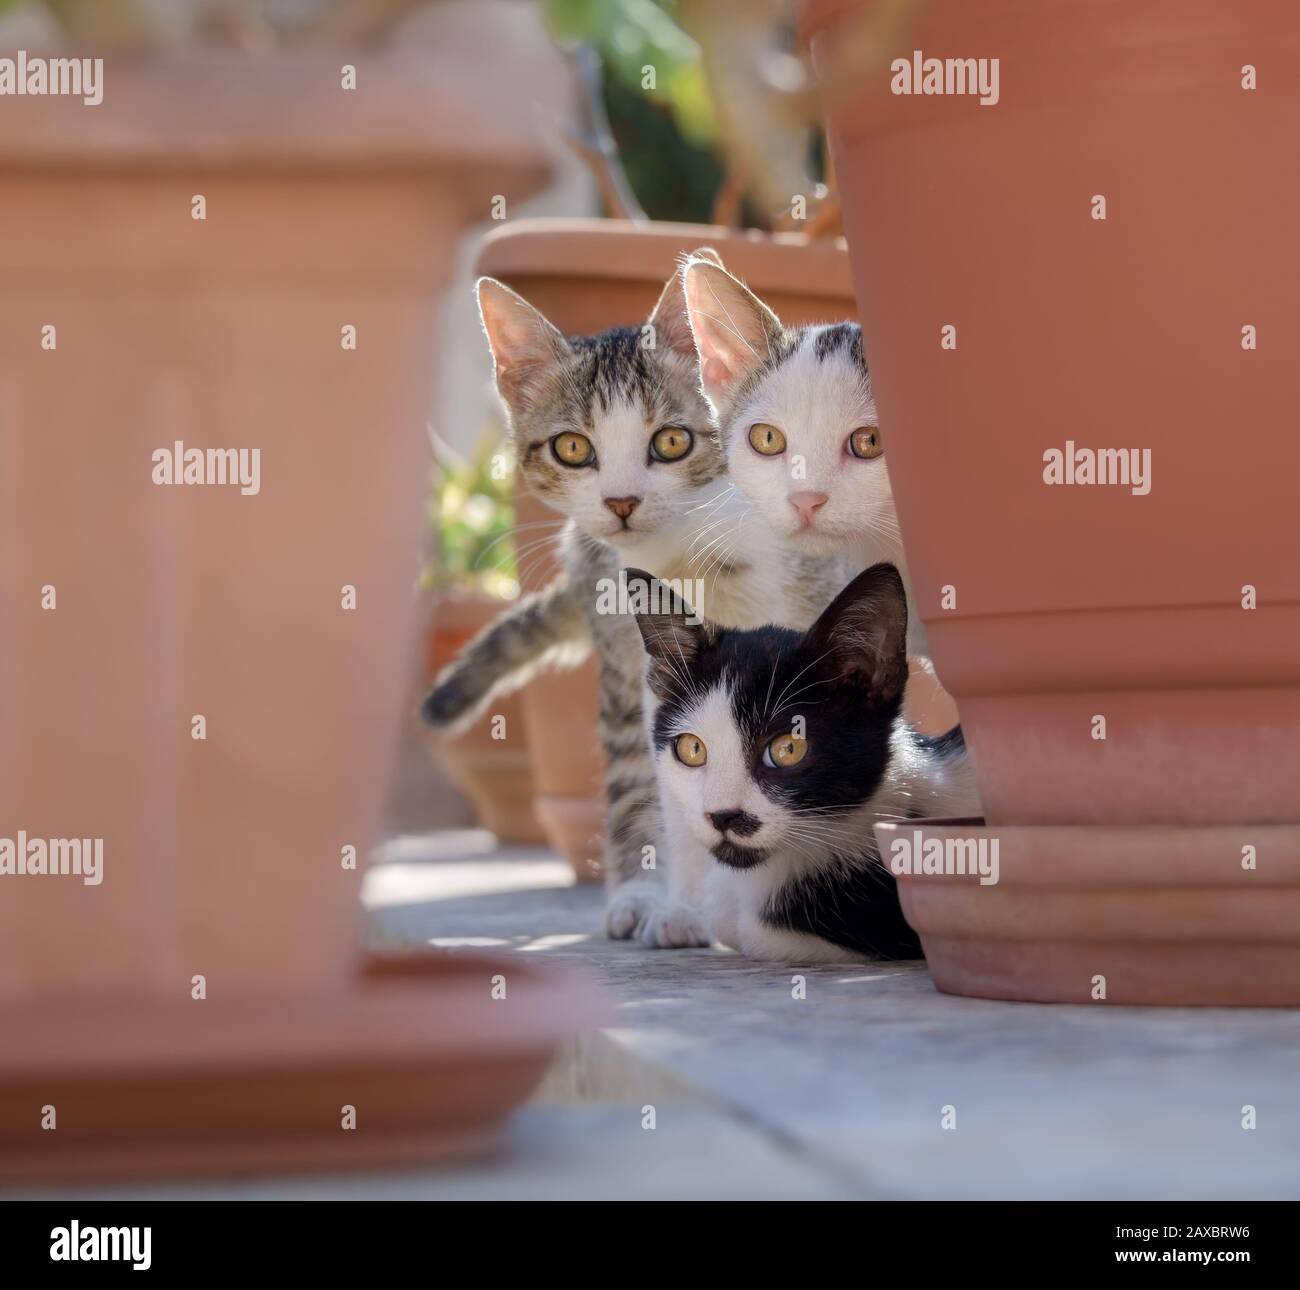 Three curious cat kittens, bicolor, posing on a garden wall, peering out of their hideout between flowerpots and looking attentively, Crete, Greece Stock Photo